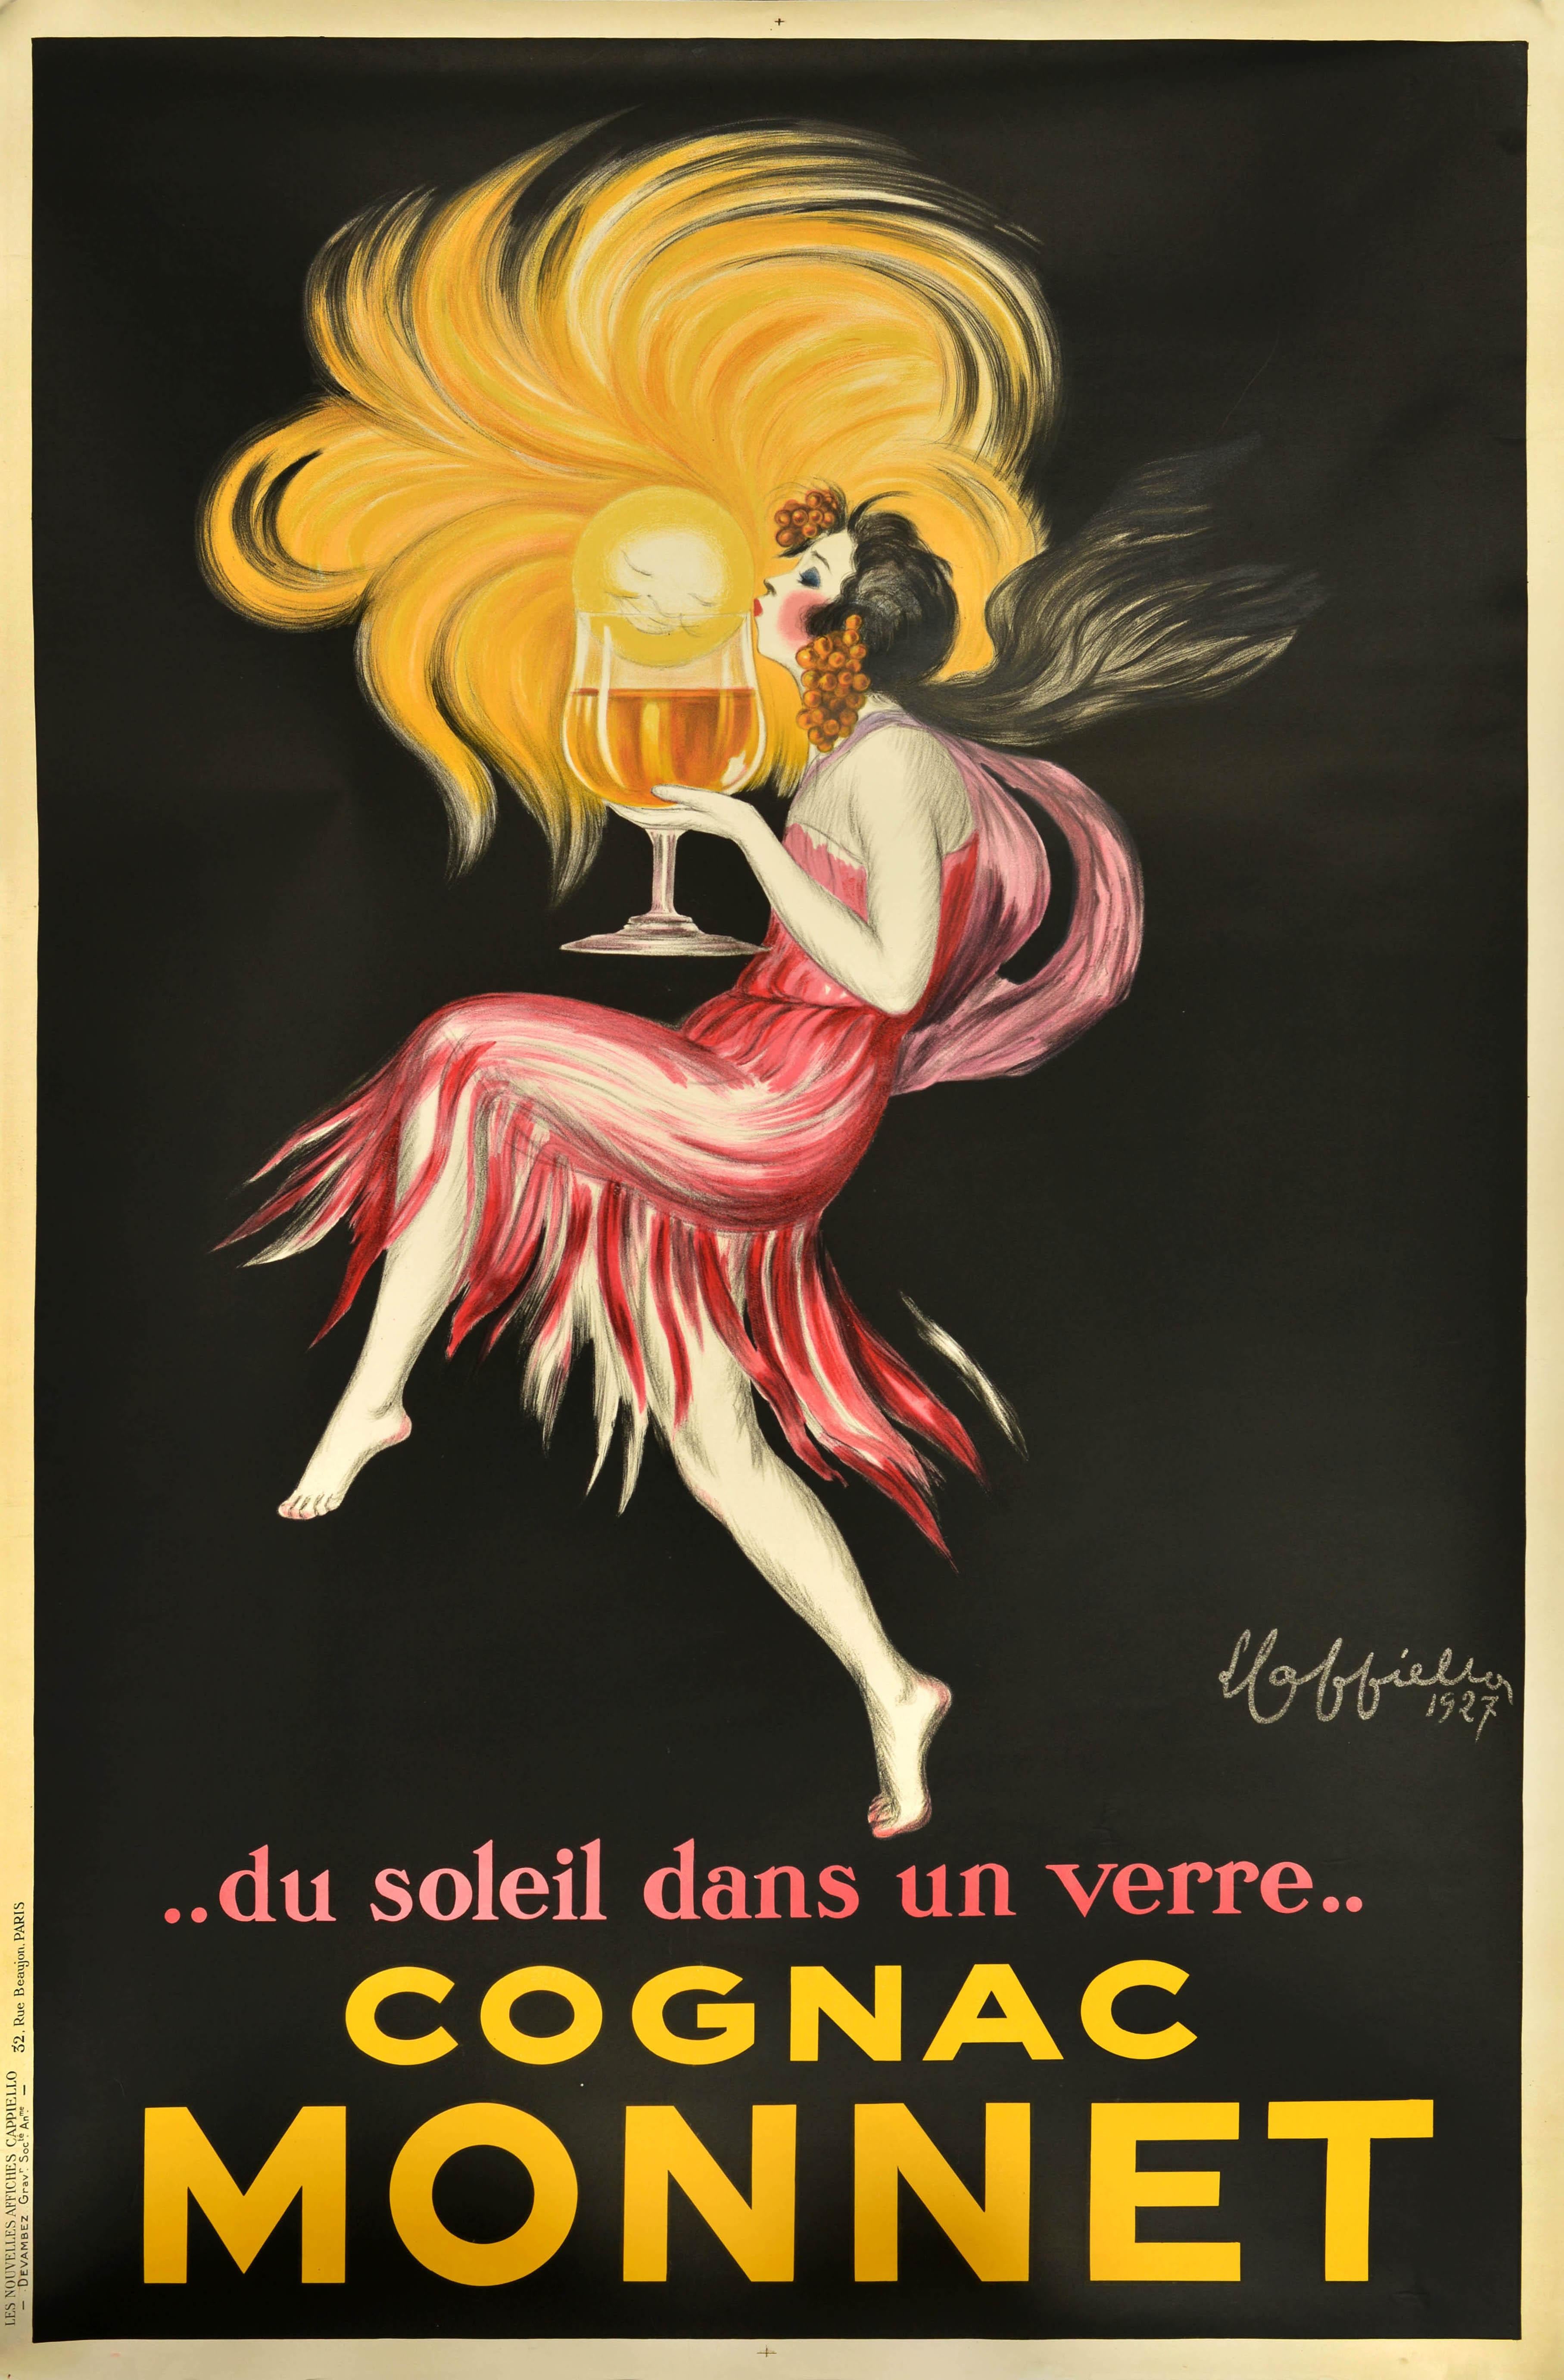 Original vintage drink poster advertising Cognac Monnet featuring a stunning design by the renowned poster artist Leonetto Cappiello (1875-1942) depicting a lady in a pink dress with grapes in her flowing hair, kissing a smiling sun in the top of